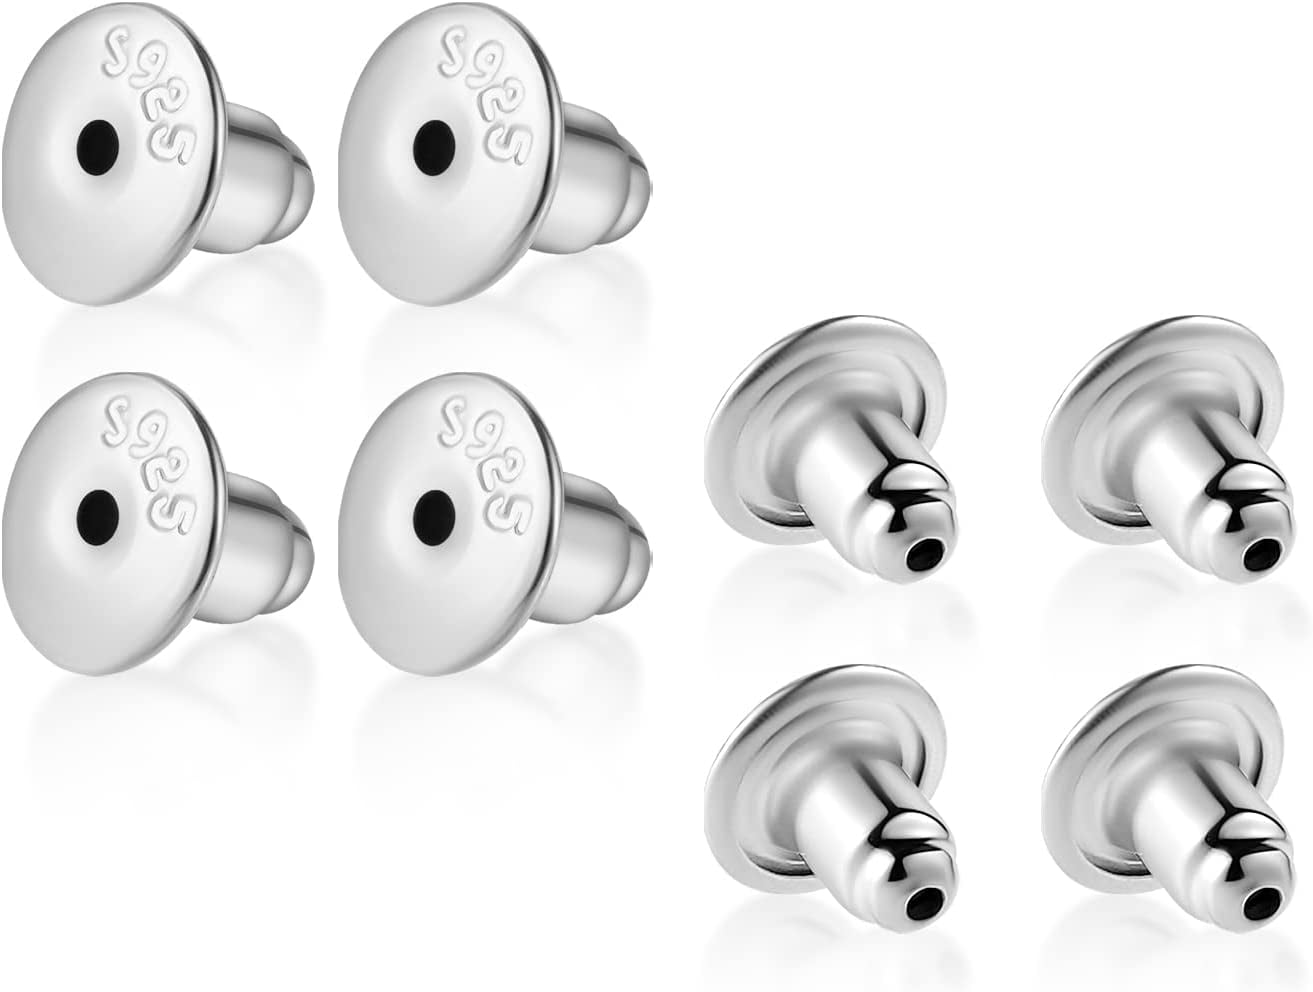 Earring Backs for Studs, Moconar 12PCS 925 Sterling Silver Earring Backs  Replacements, Hypoallergenic Earring Backs Secure Ear Locking Pierced  Earring Backs for Studs